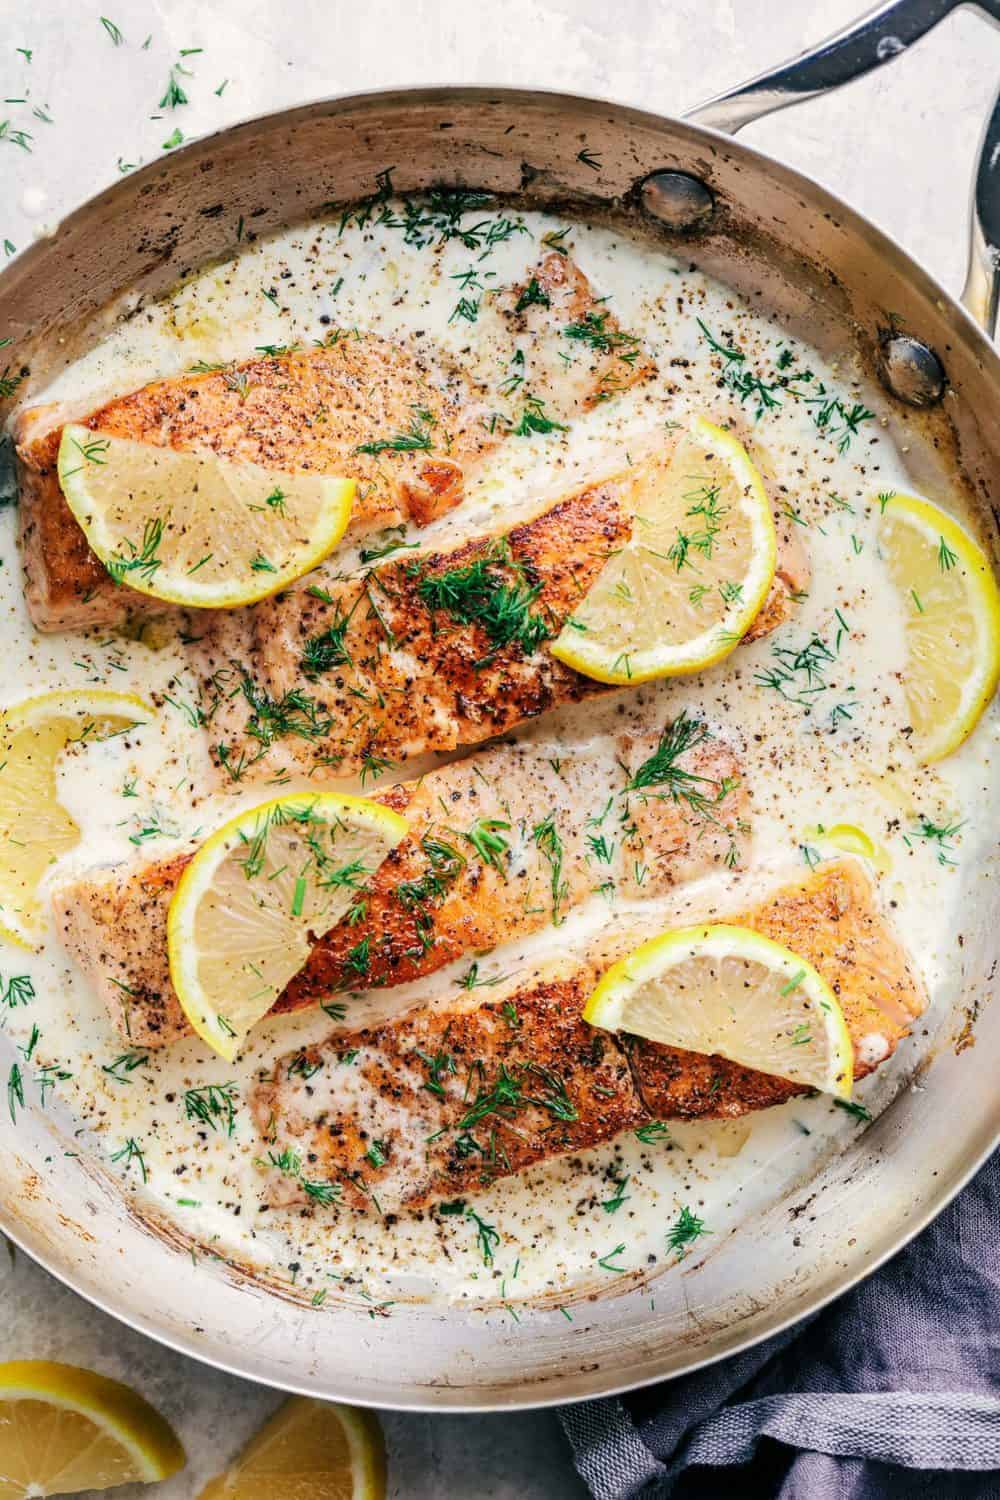 Baked Salmon with Creamy Dill Sauce - Keto fish meals